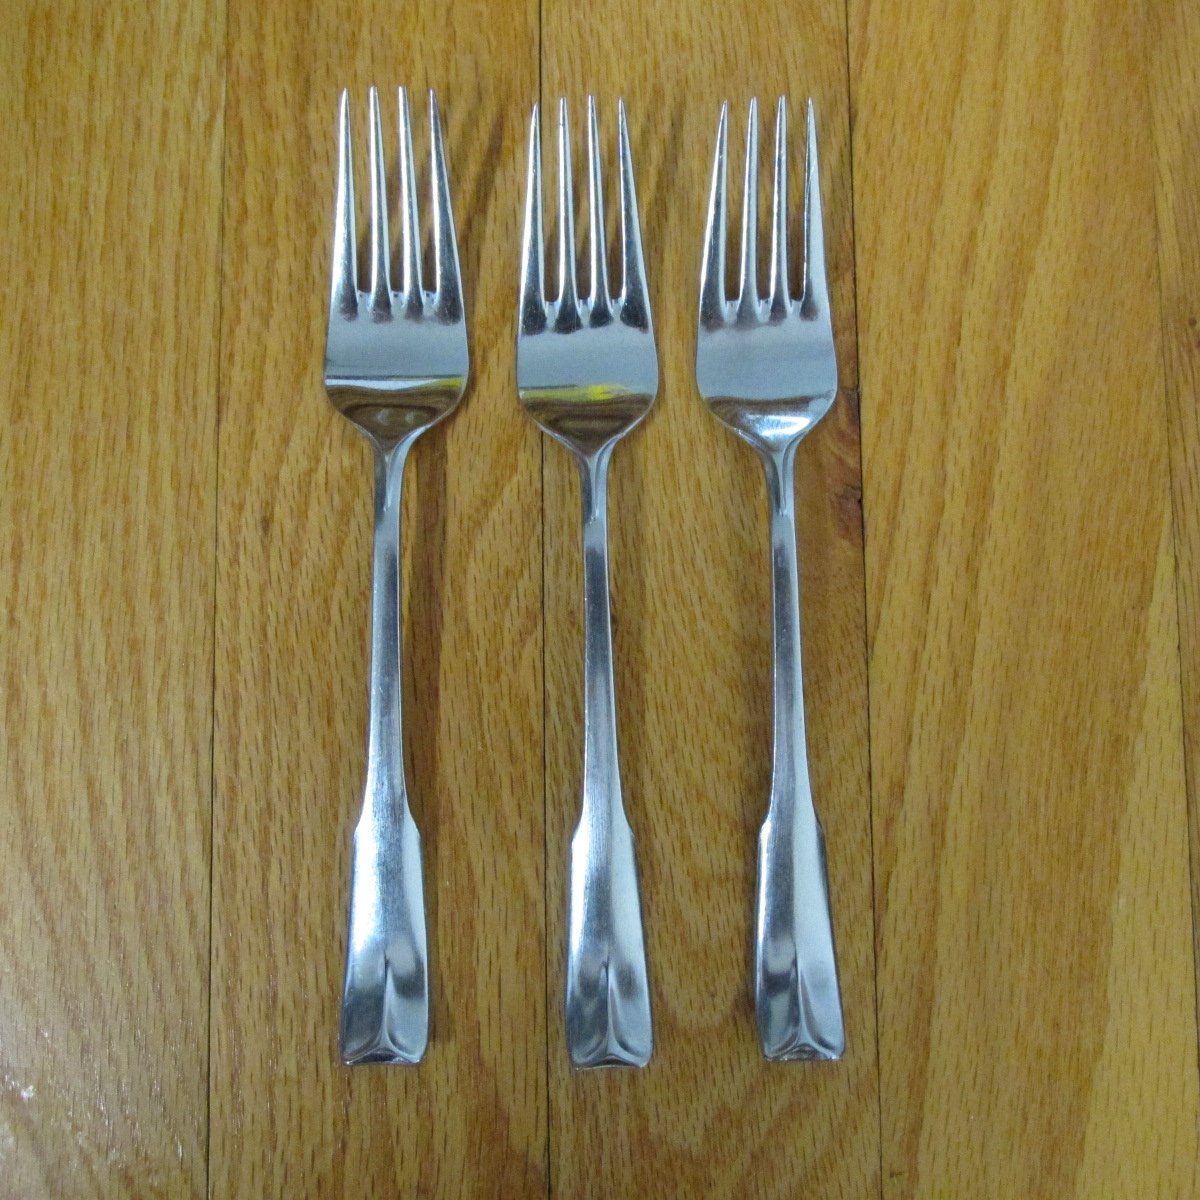 STAINLESS JAPAN AMERICANA FLATWARE 3 FORKS SILVERWARE REPLACEMENT